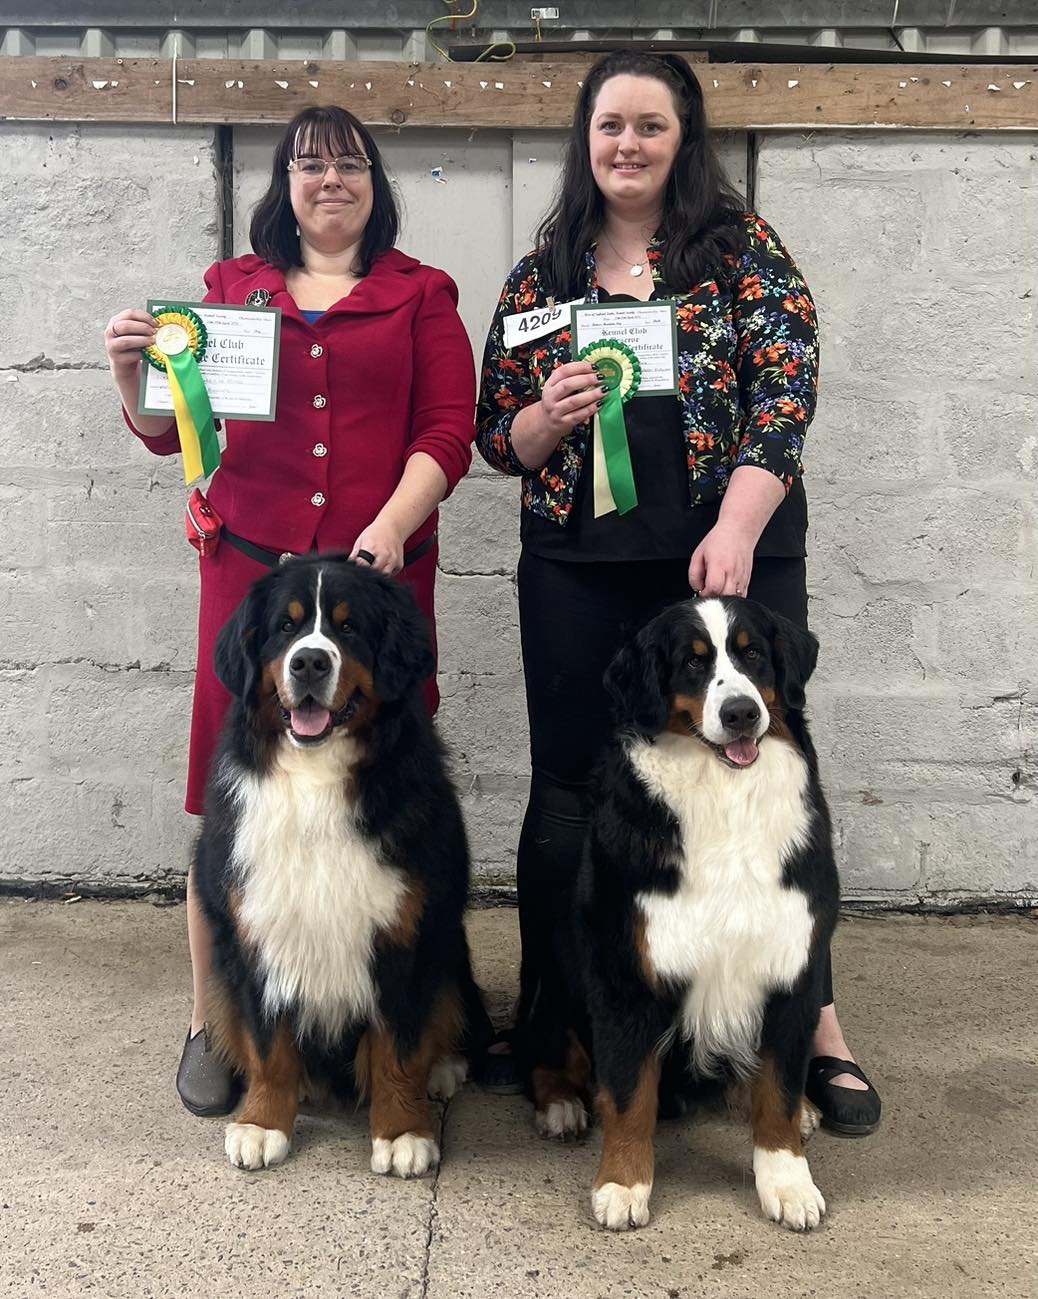 🙌🏻What a fantastic day at WELKS for our little Team Waldershelf! 🙌🏻

CUBBY - &lsquo;Waldershelf Cubby Ad Astra&rsquo; wins Limit Dog and the DOG CC!!! Huge congratulations to the Hughes&rsquo;

His daughter GINNY - &lsquo;Waldershelf Gin and Toni